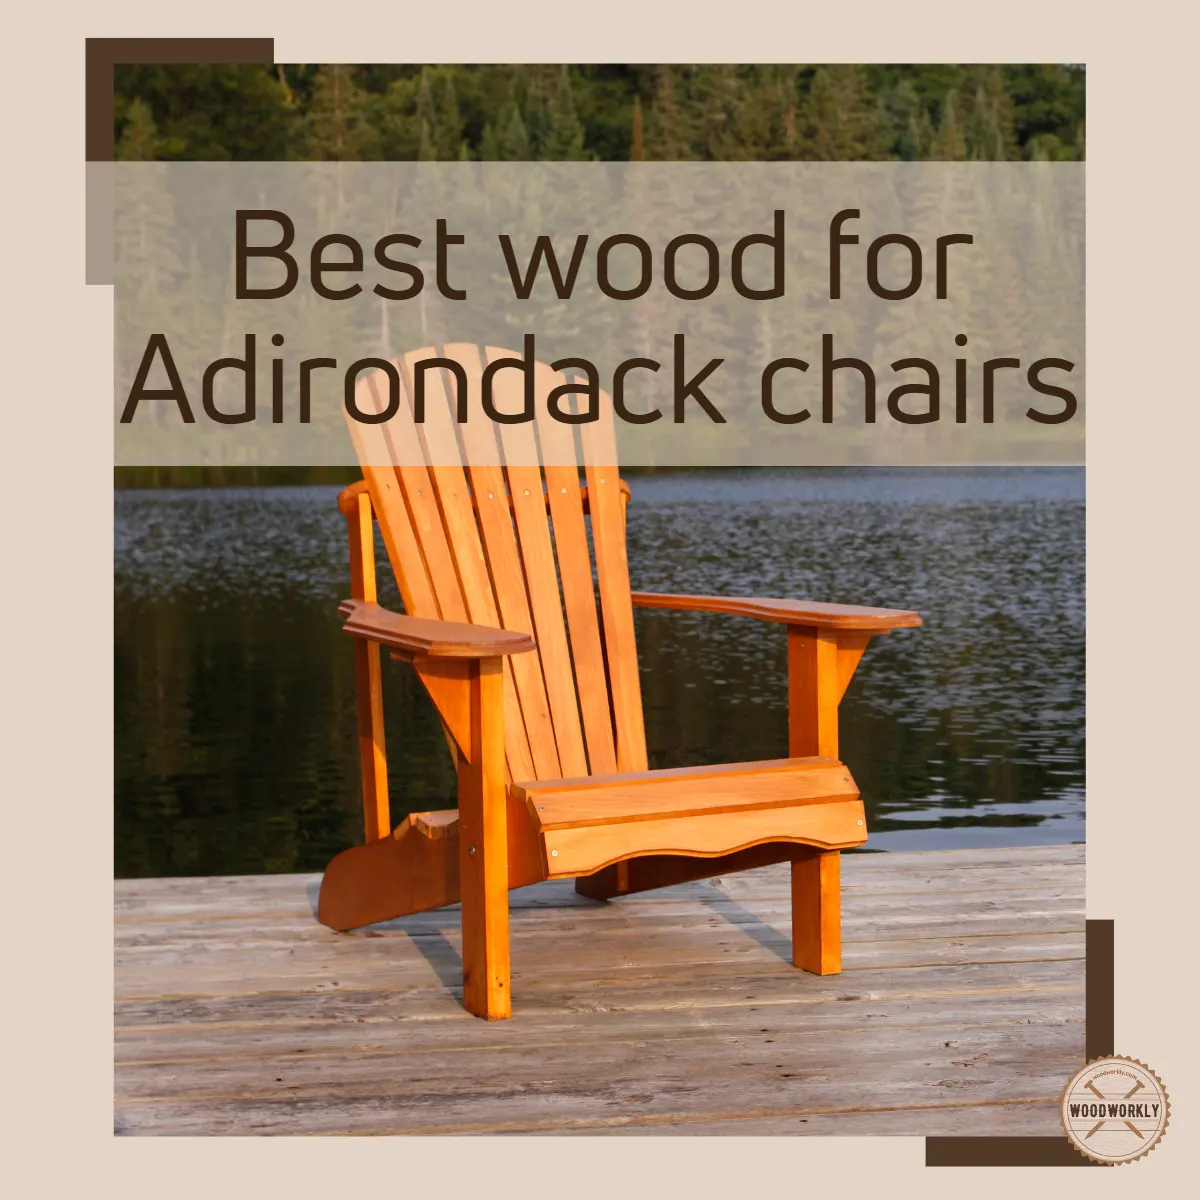 Best wood for Adirondack chairs